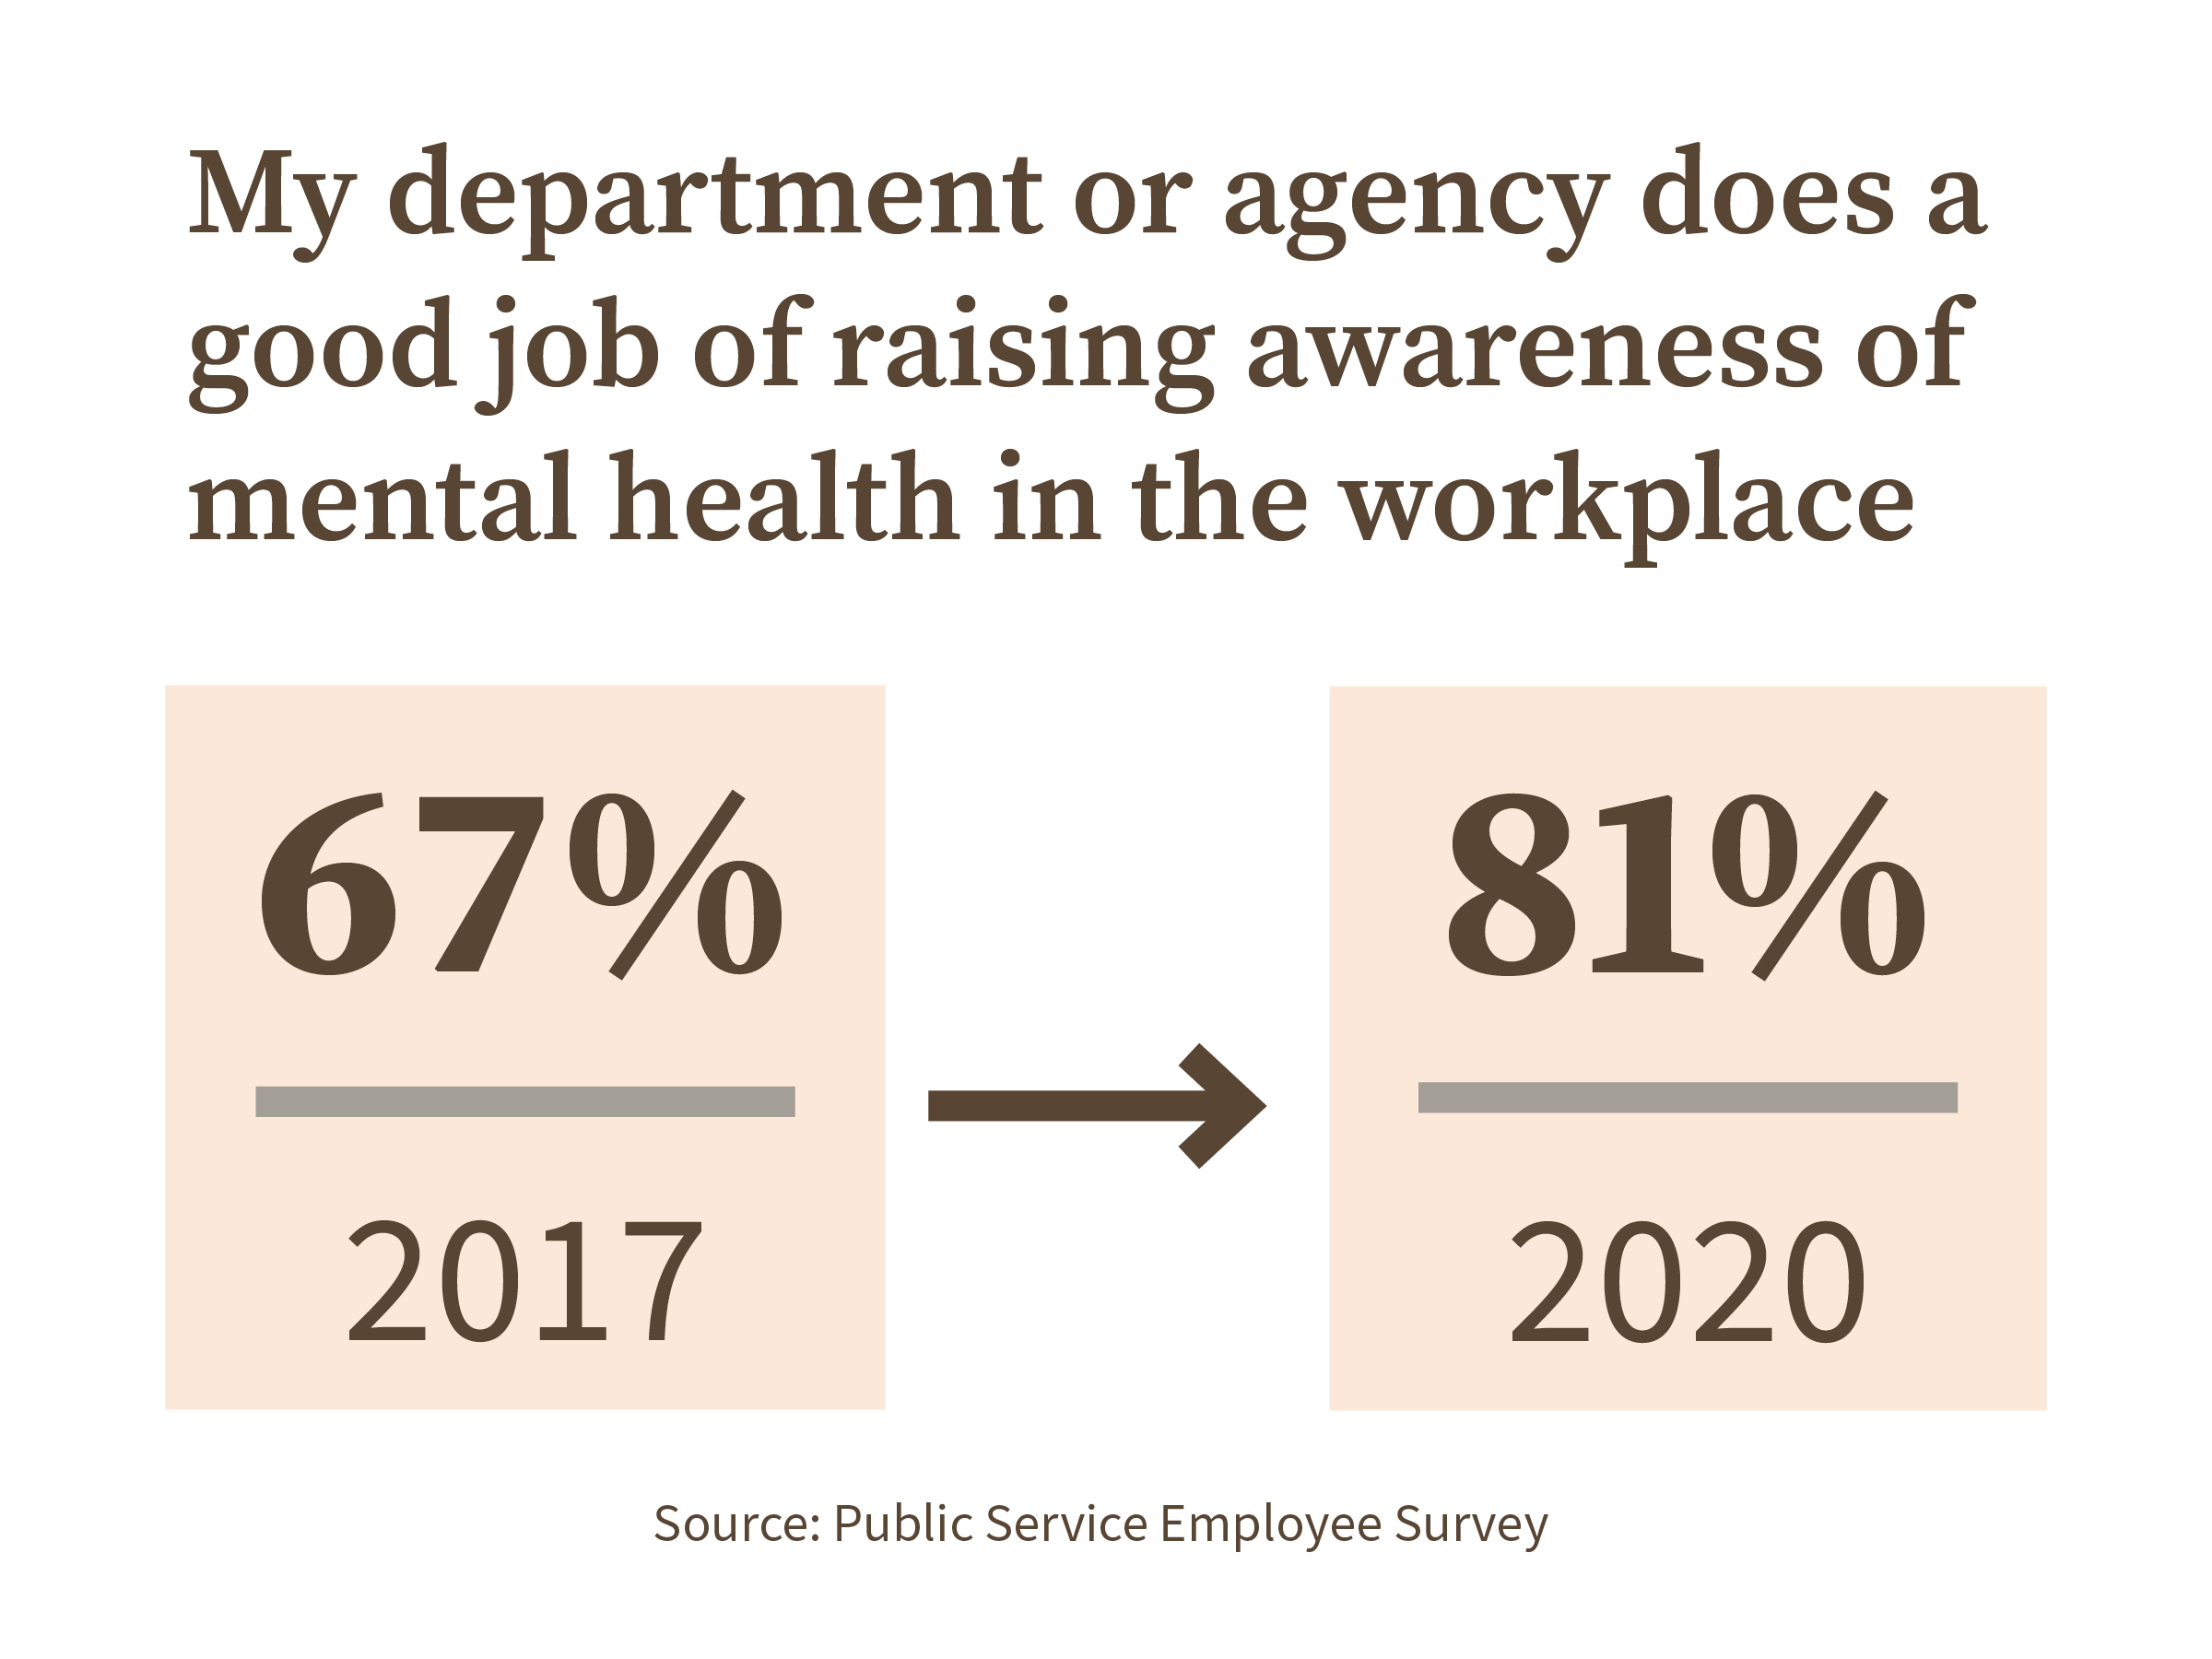 Highlighting mental health in the workplace statistics based on data obtained from the Public Service Employee Survey